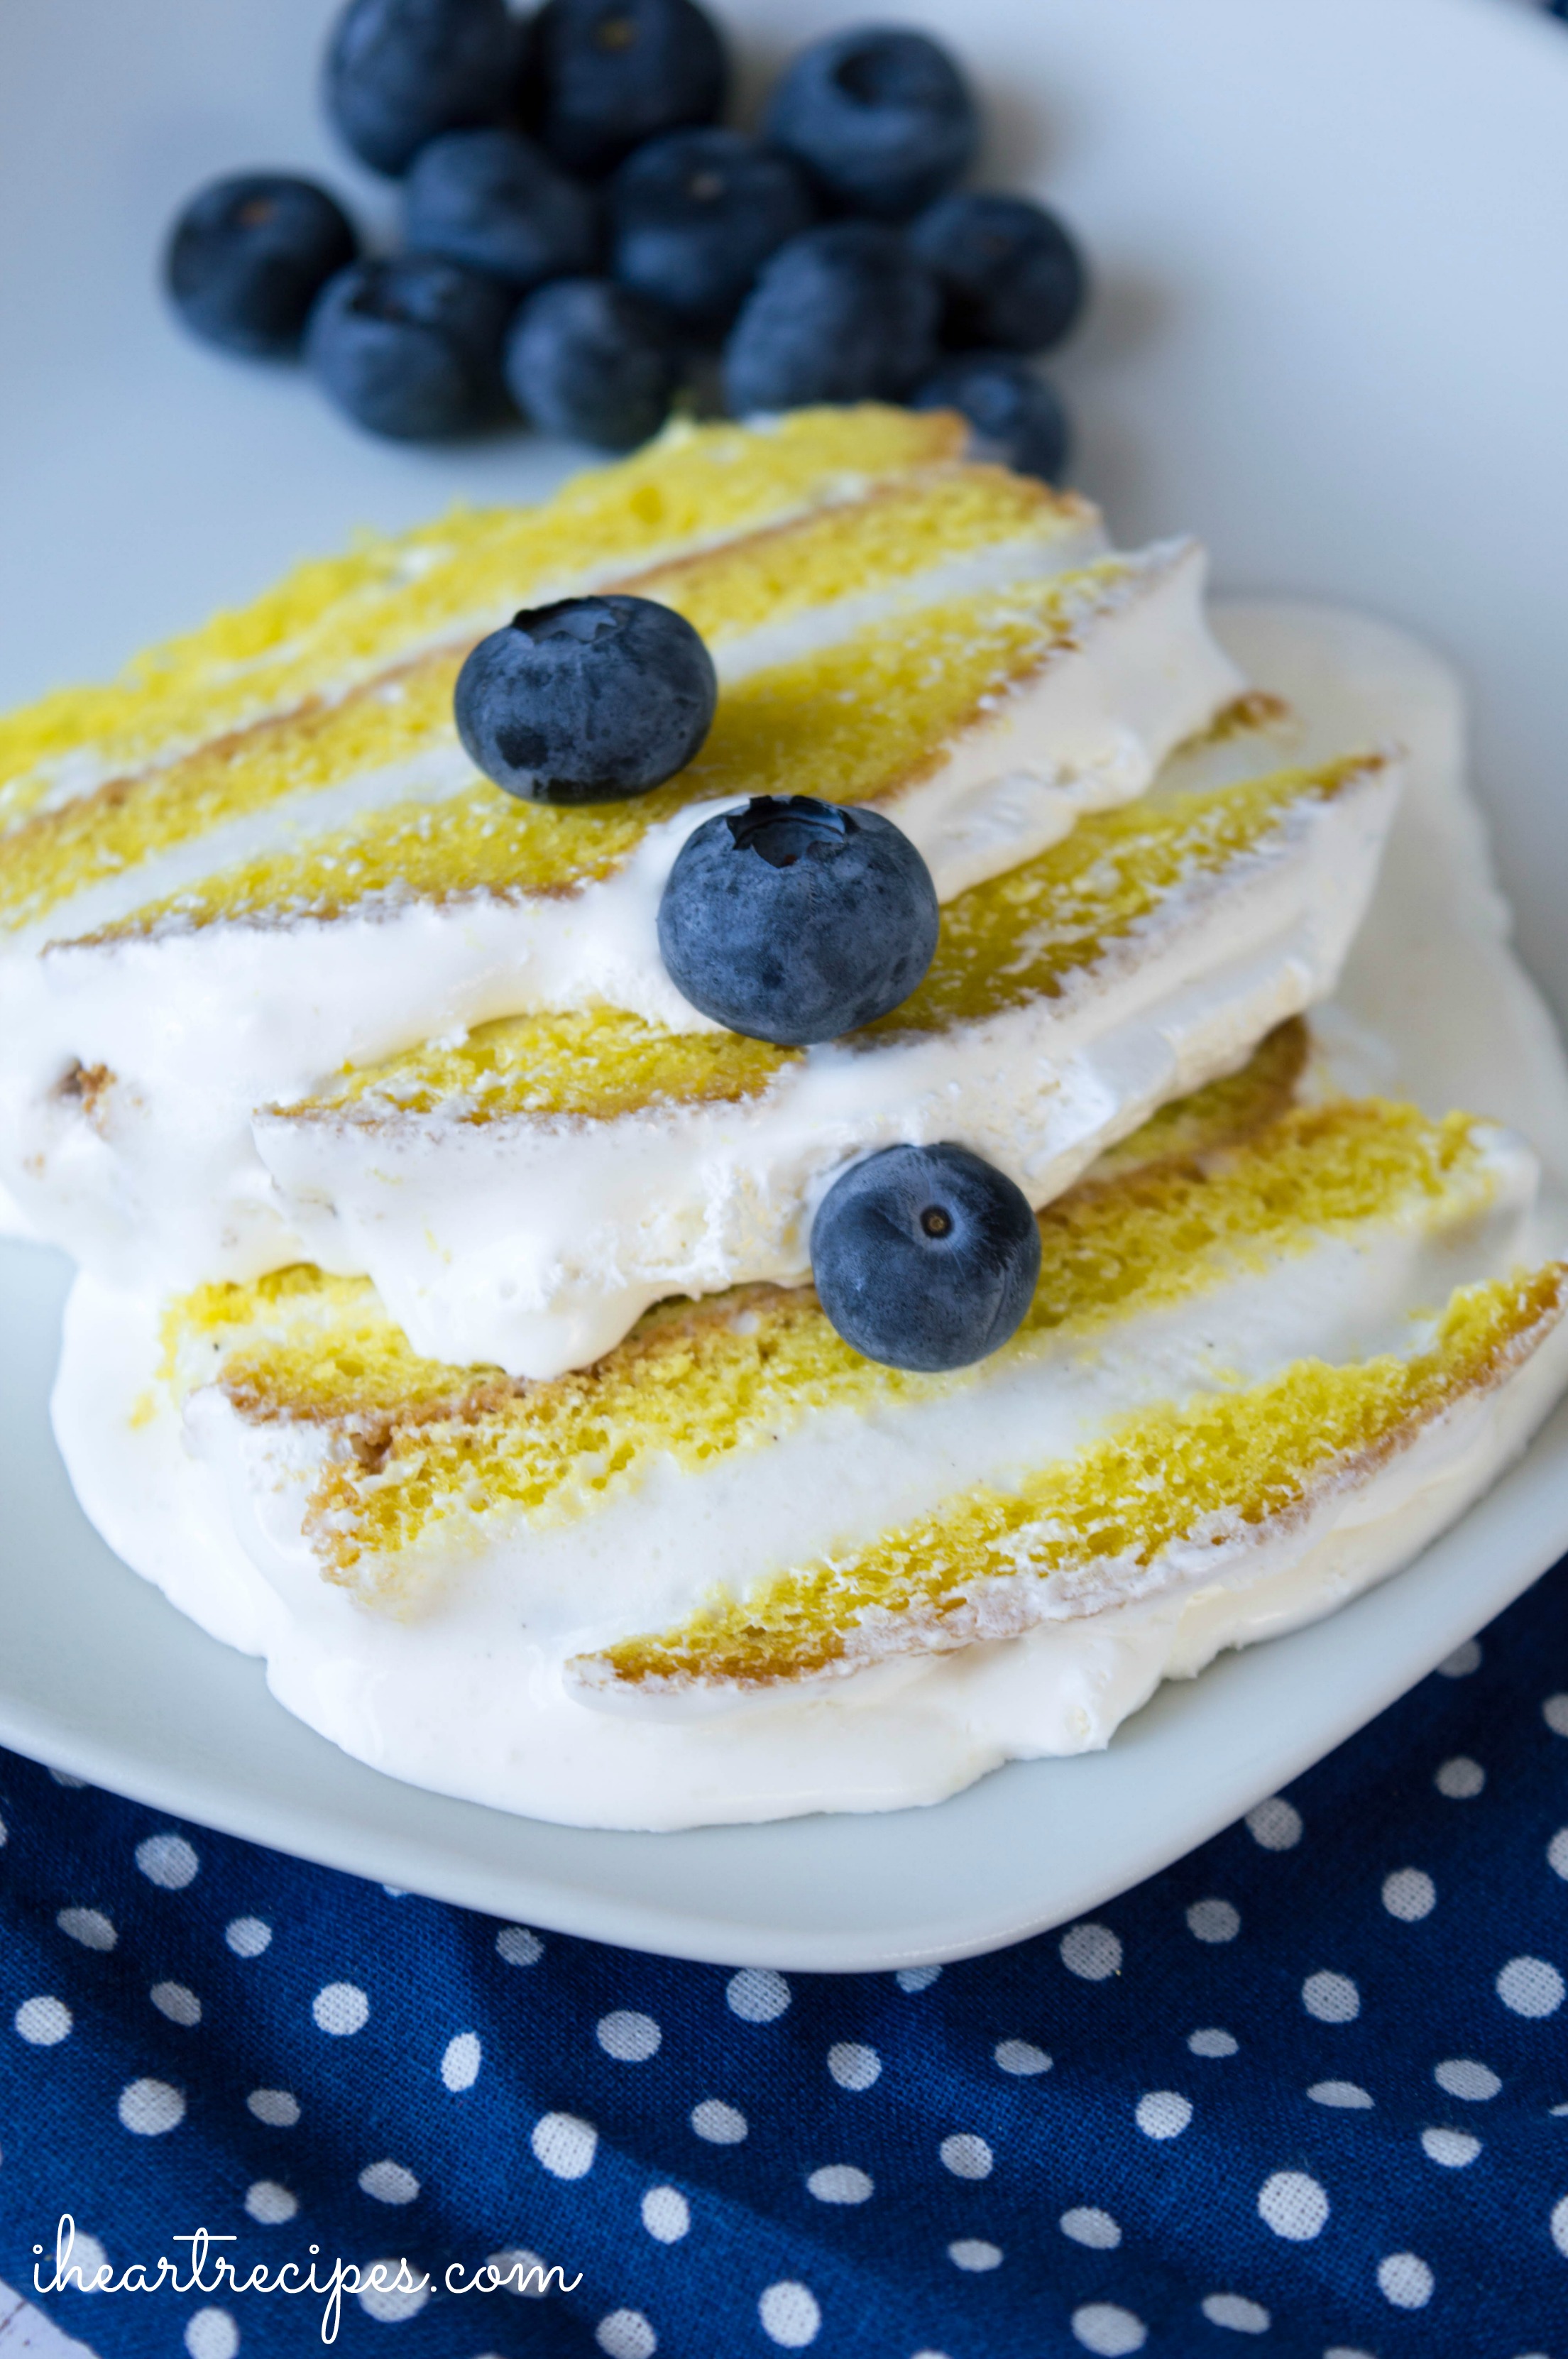 Thin slices of lemon ice cream cake stacked on a white plate and topped with fresh blueberries. The perfect summer treat!